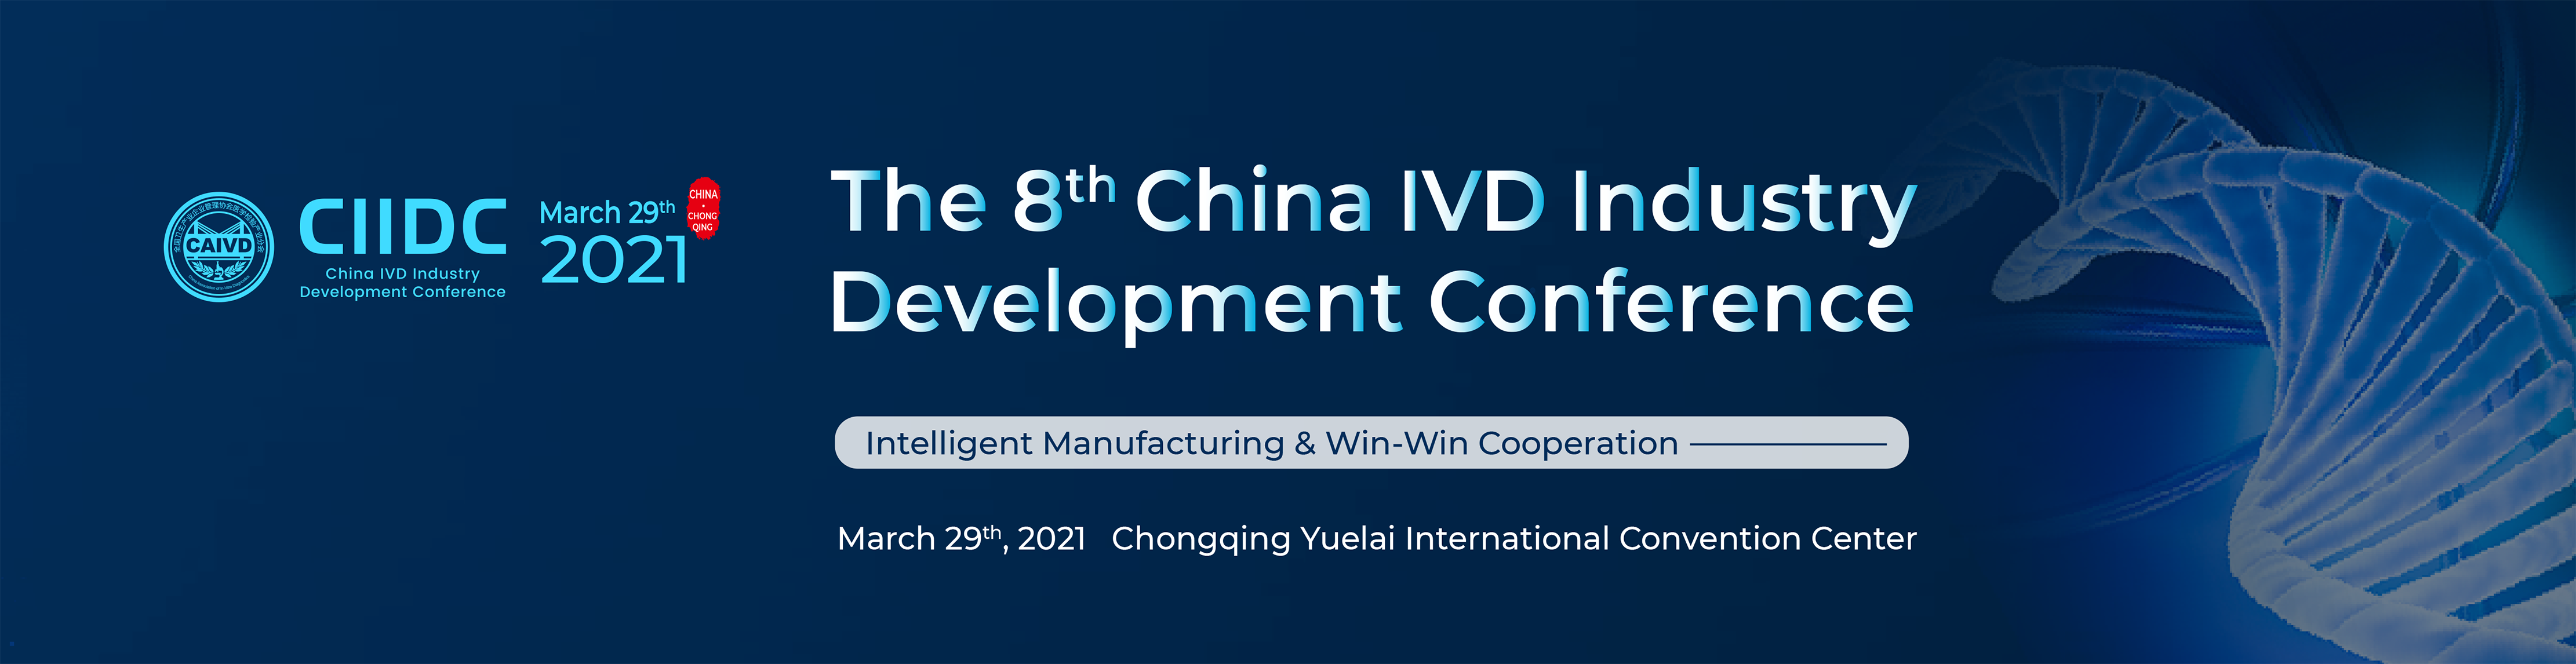 The 8th China IVD Industry Development Conference